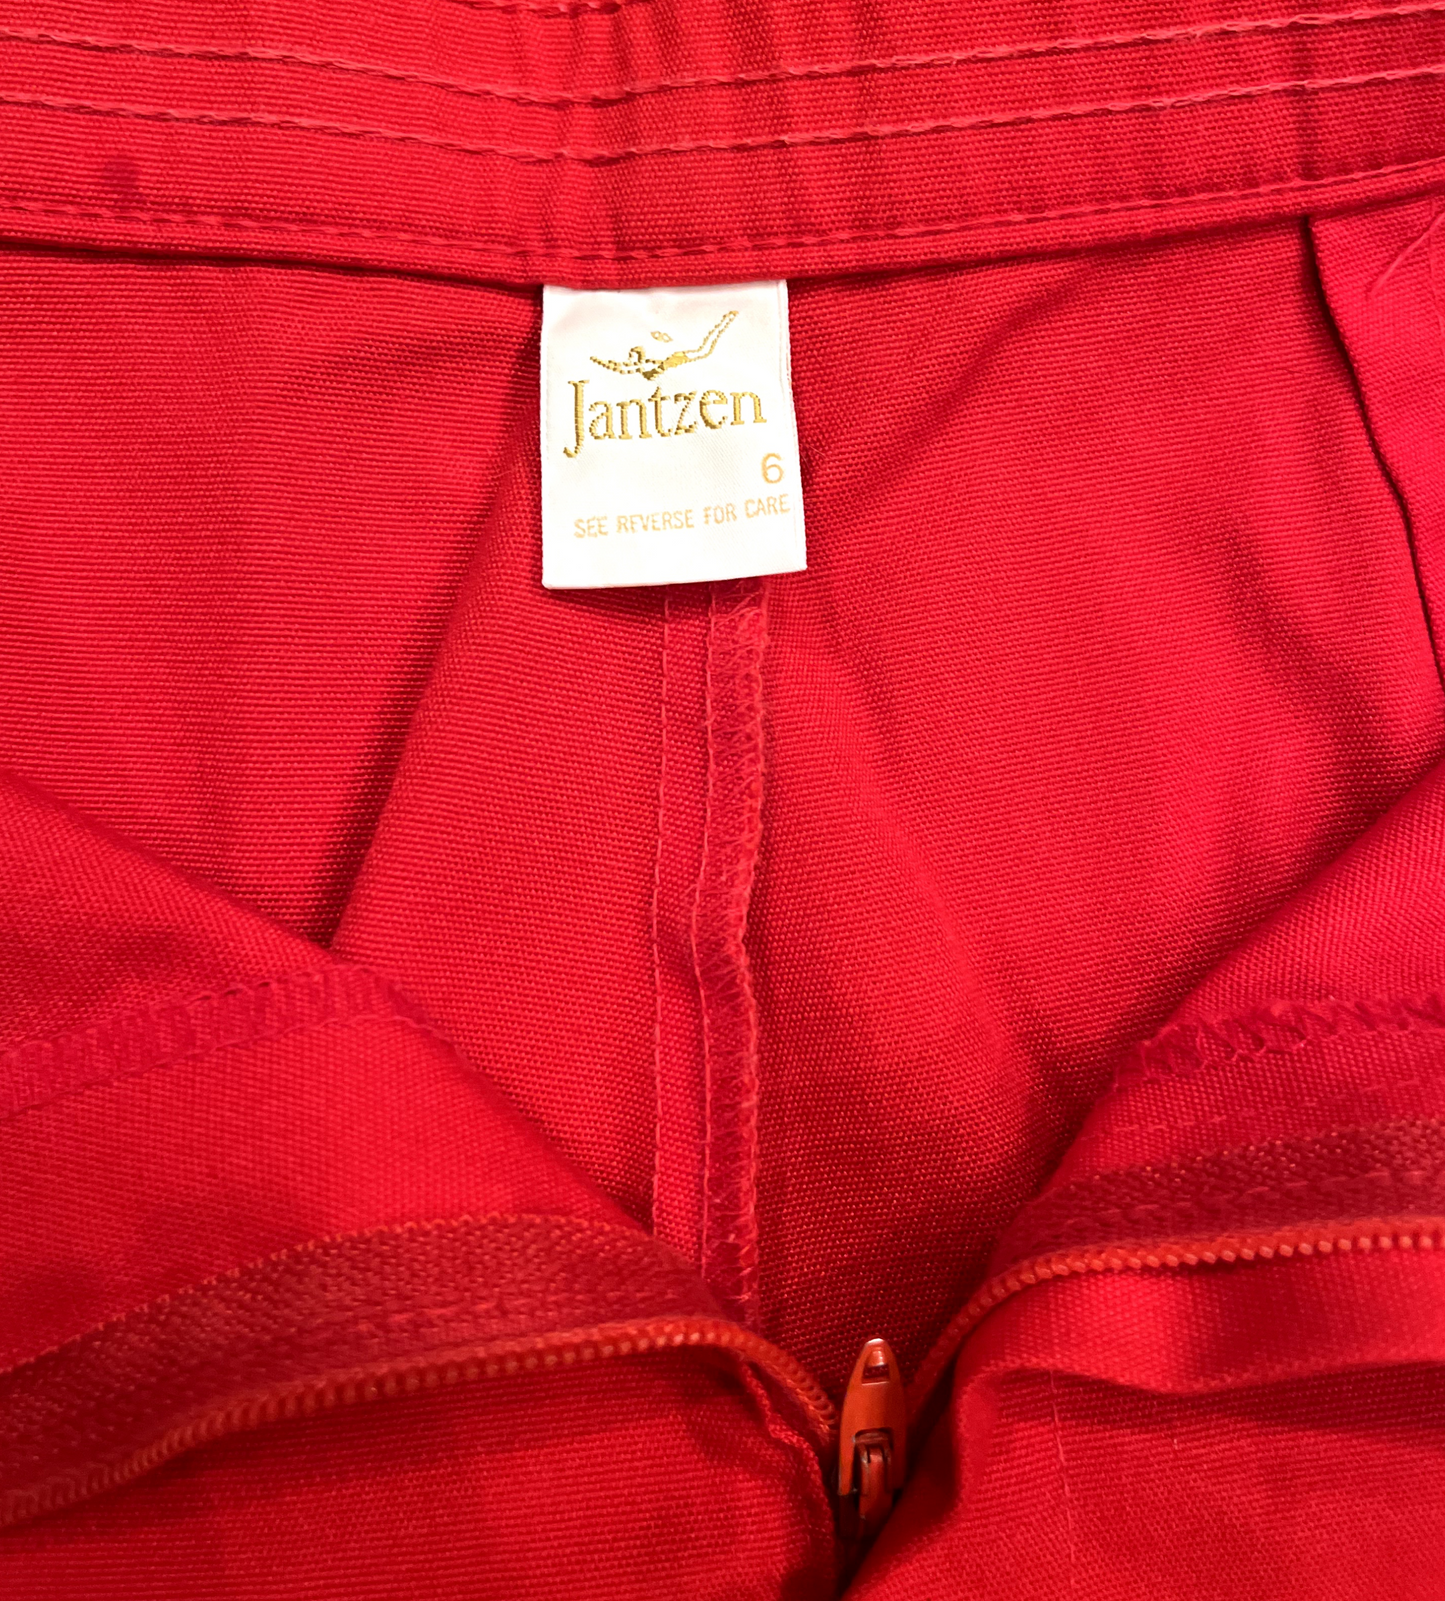 Close up of Jantzen label vintage red shorts with white stripe on white background.